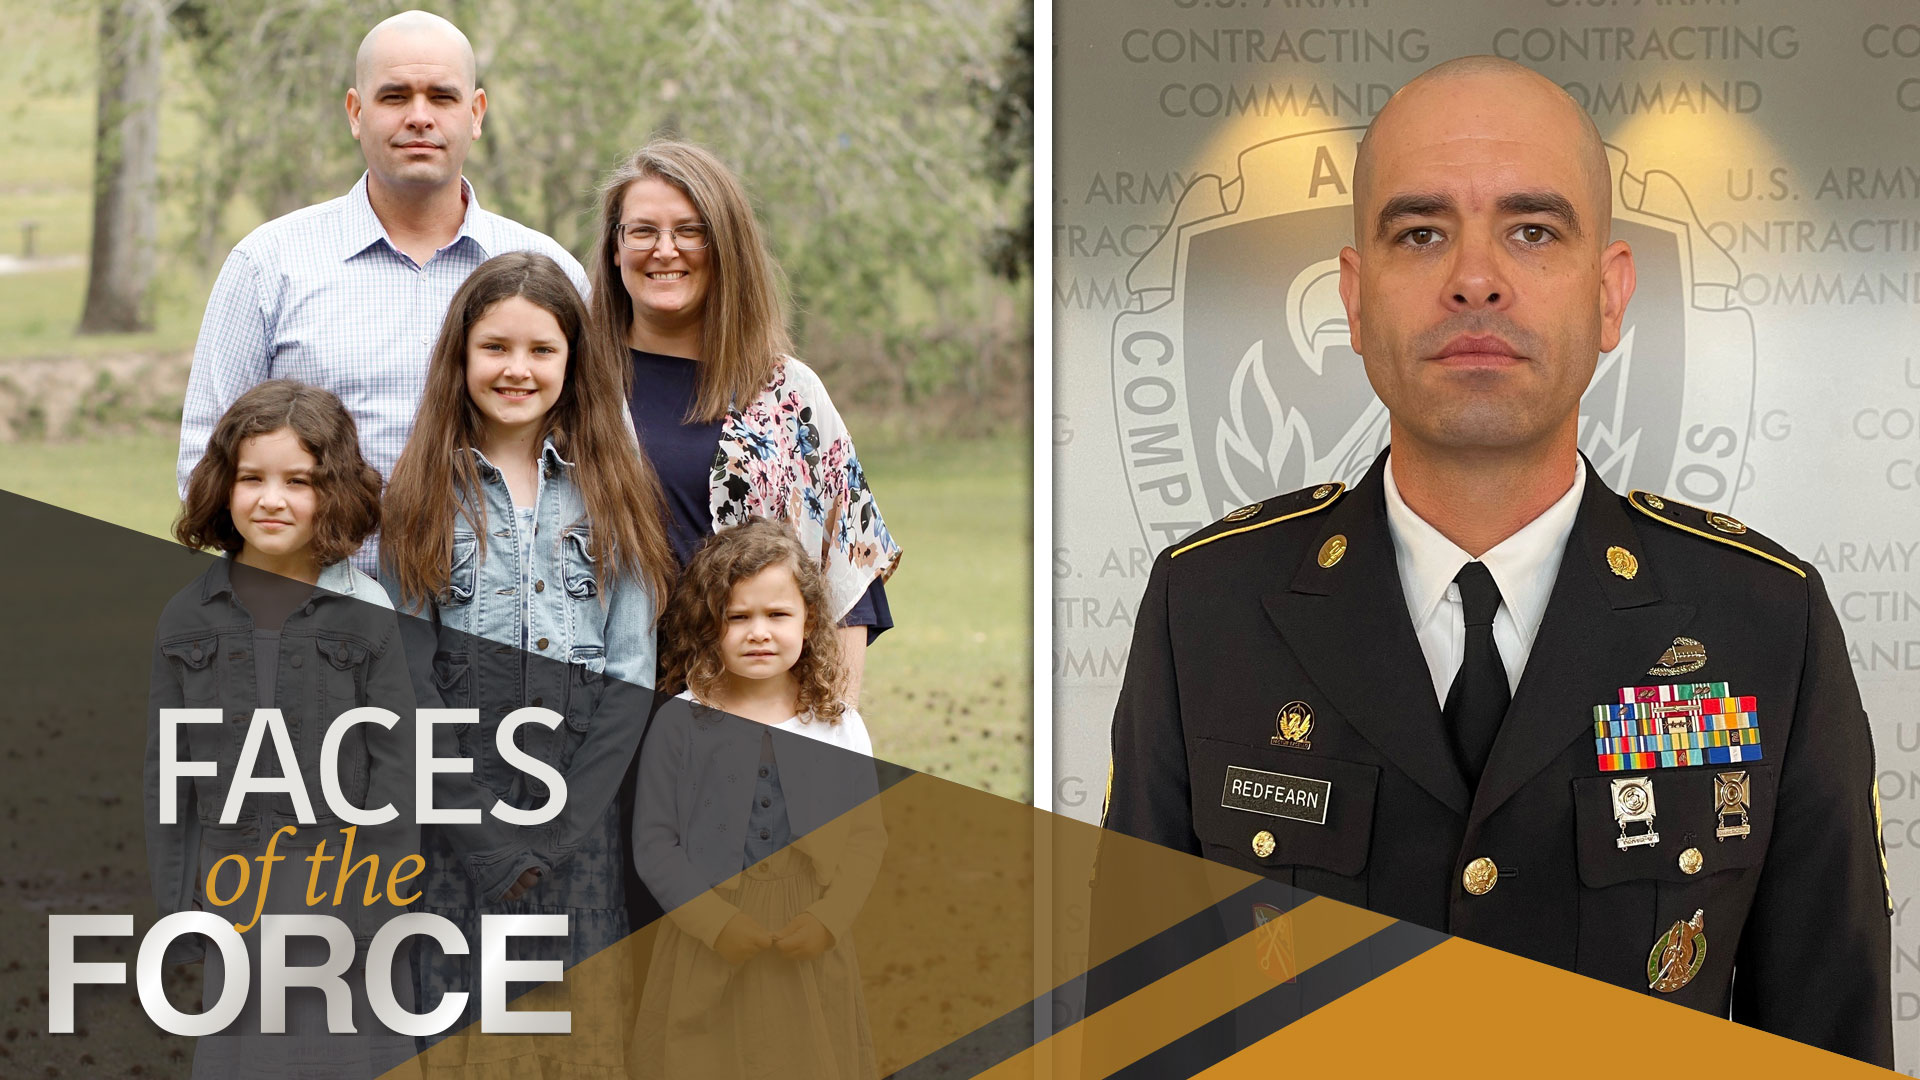 THE REDFEARNS Master Sgt. Payten Redfearn, with his wife, Alaina, and daughters Kinsey, 13, Mary, 11 and Lyla, 8, taken in their hometown of Thomasville, Georgia on March 15, 2022. (Photo provided by Master Sgt. Payten E. Redfearn)